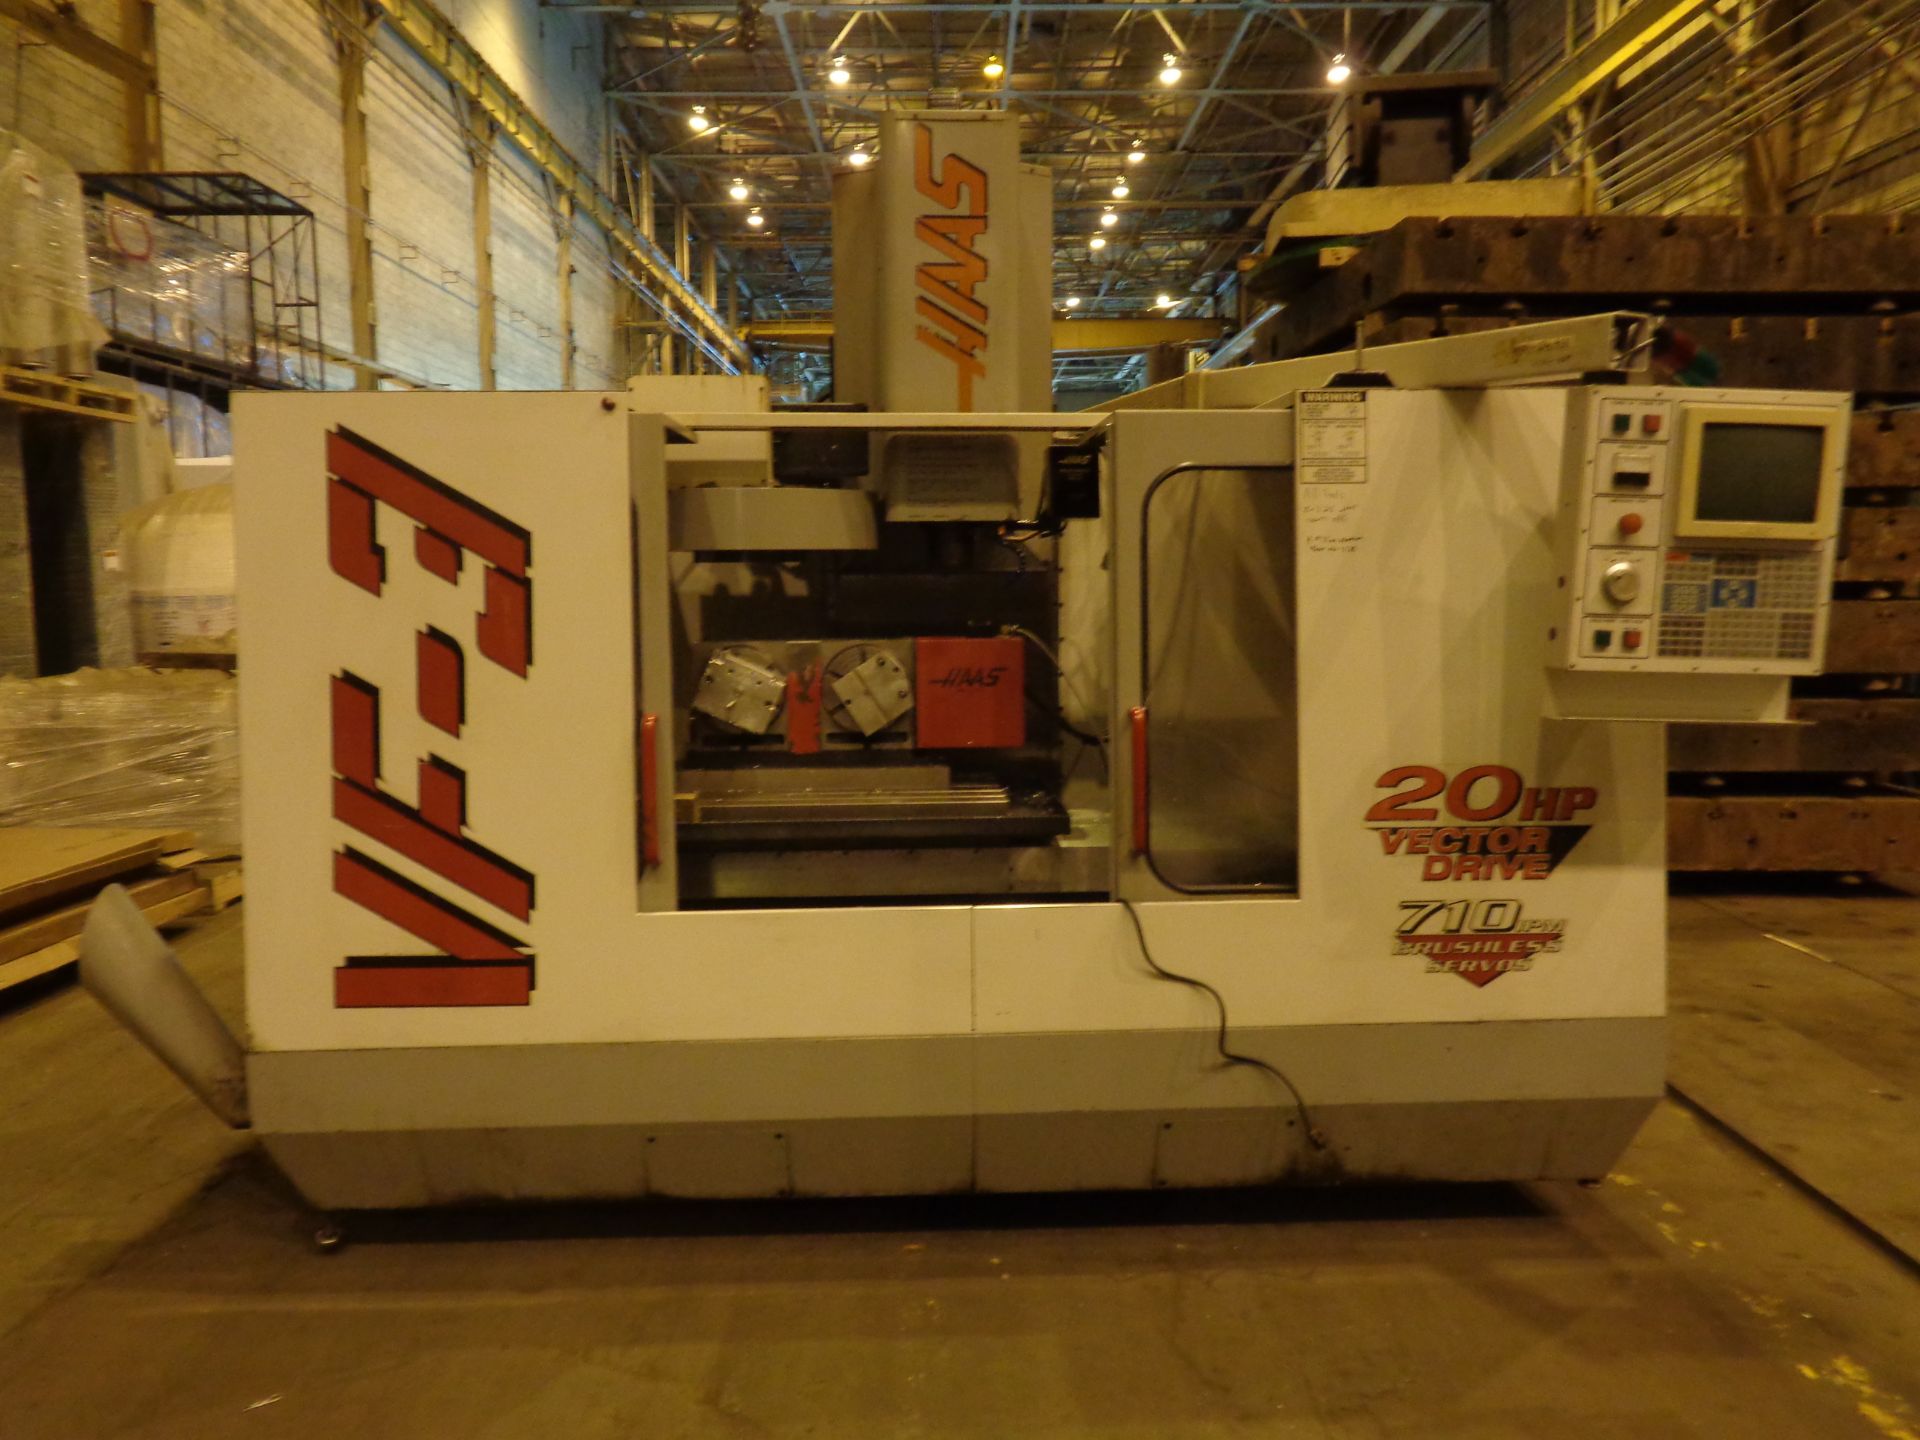 1998 Haas VF3 CNC Vertical Machining Center - Image 31 of 33